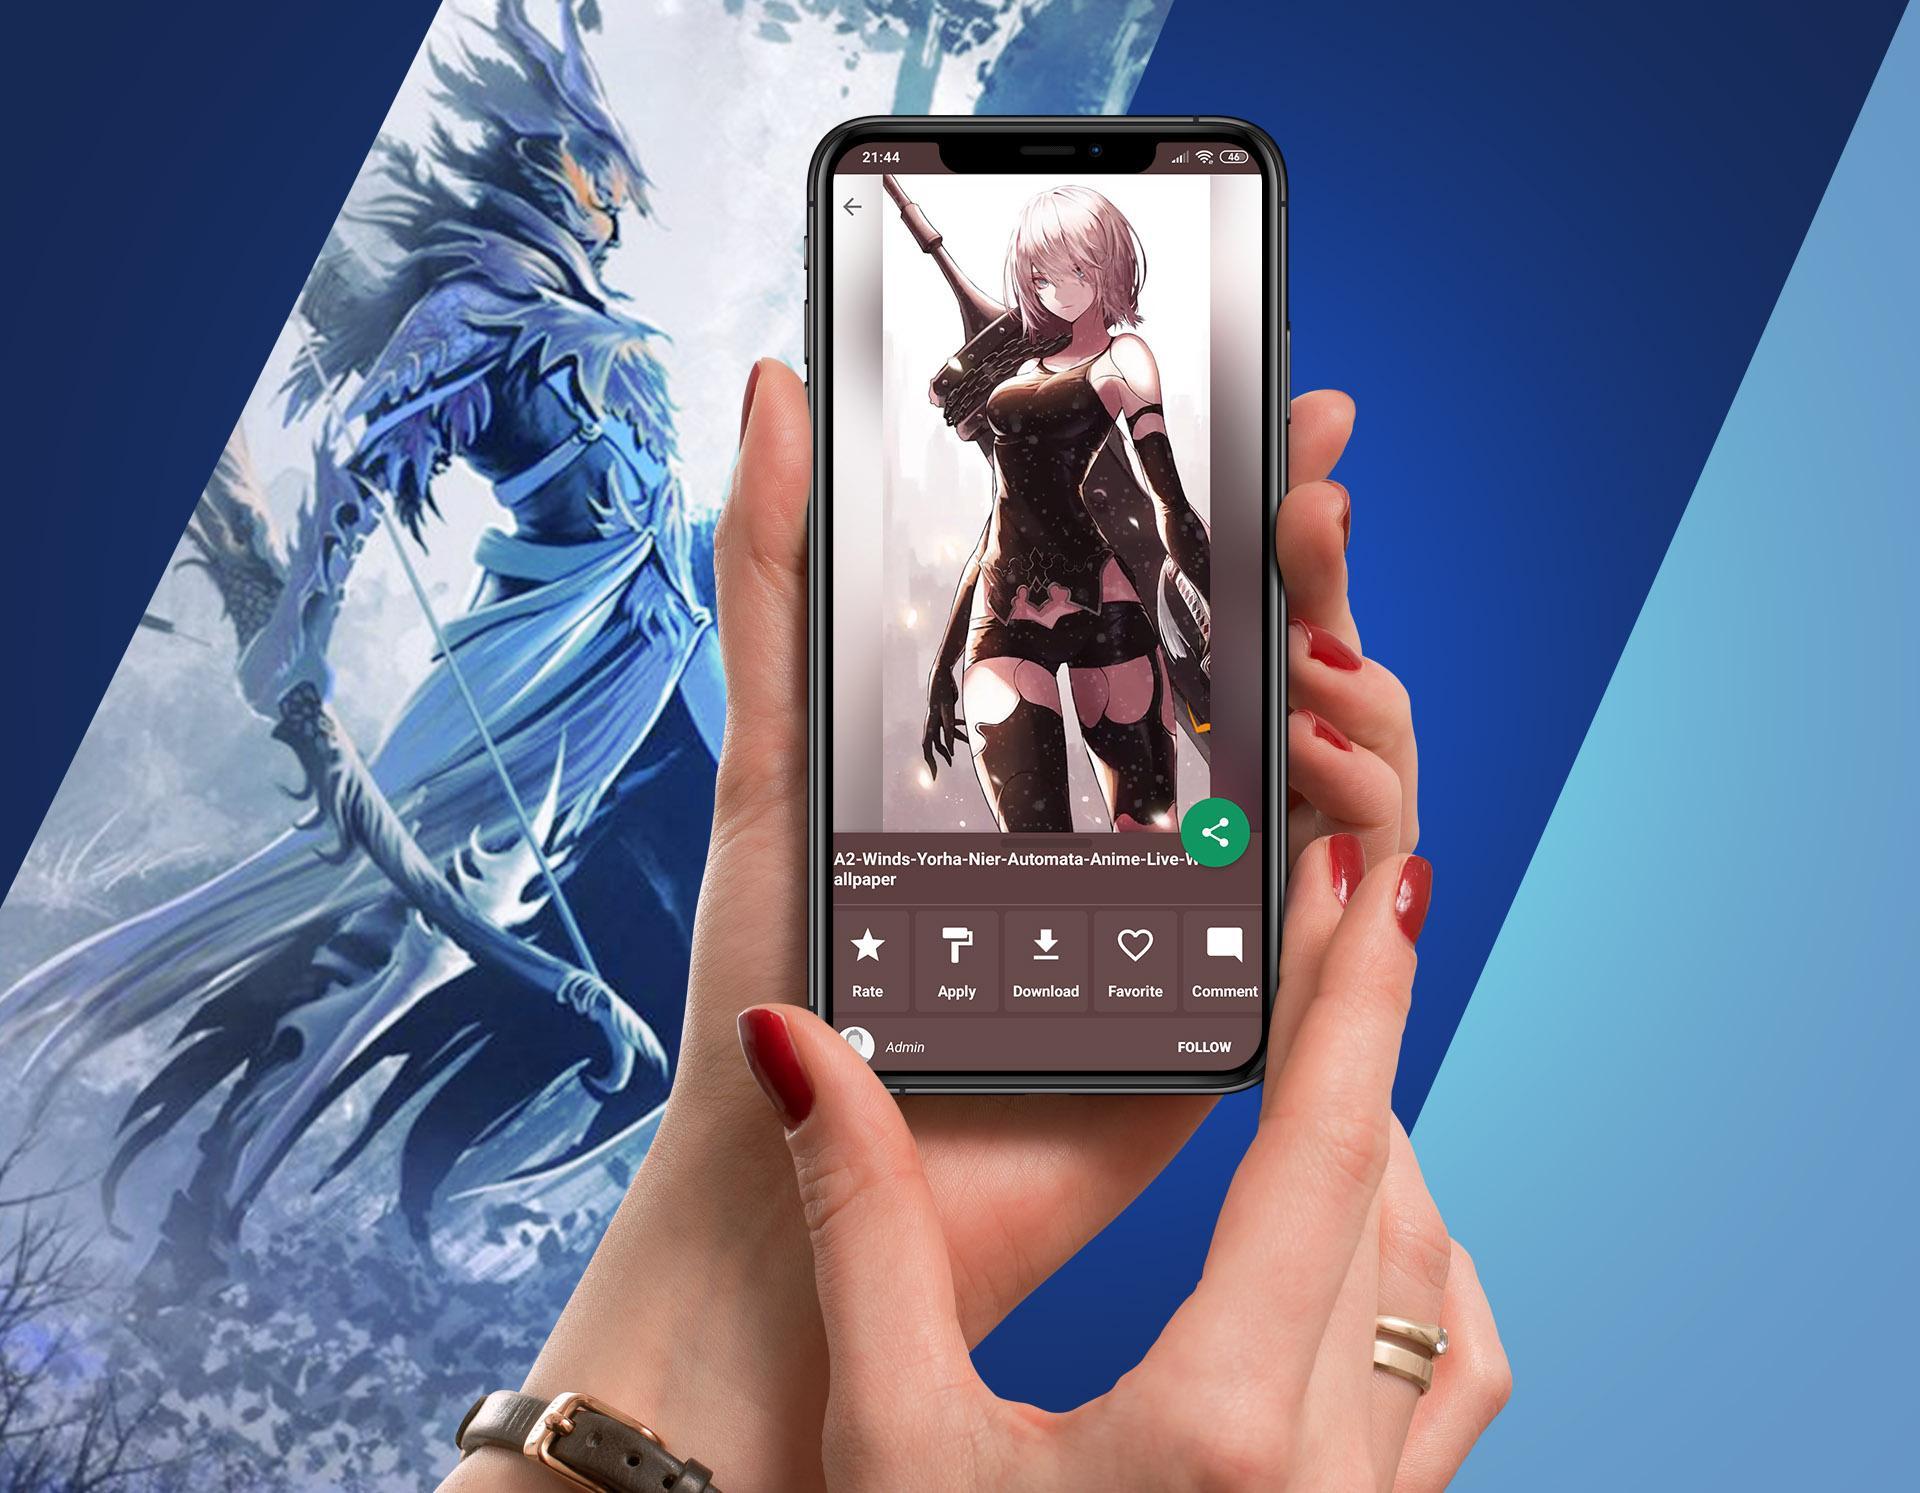 Anime 3d Live Wallpaper For Android Apk Download